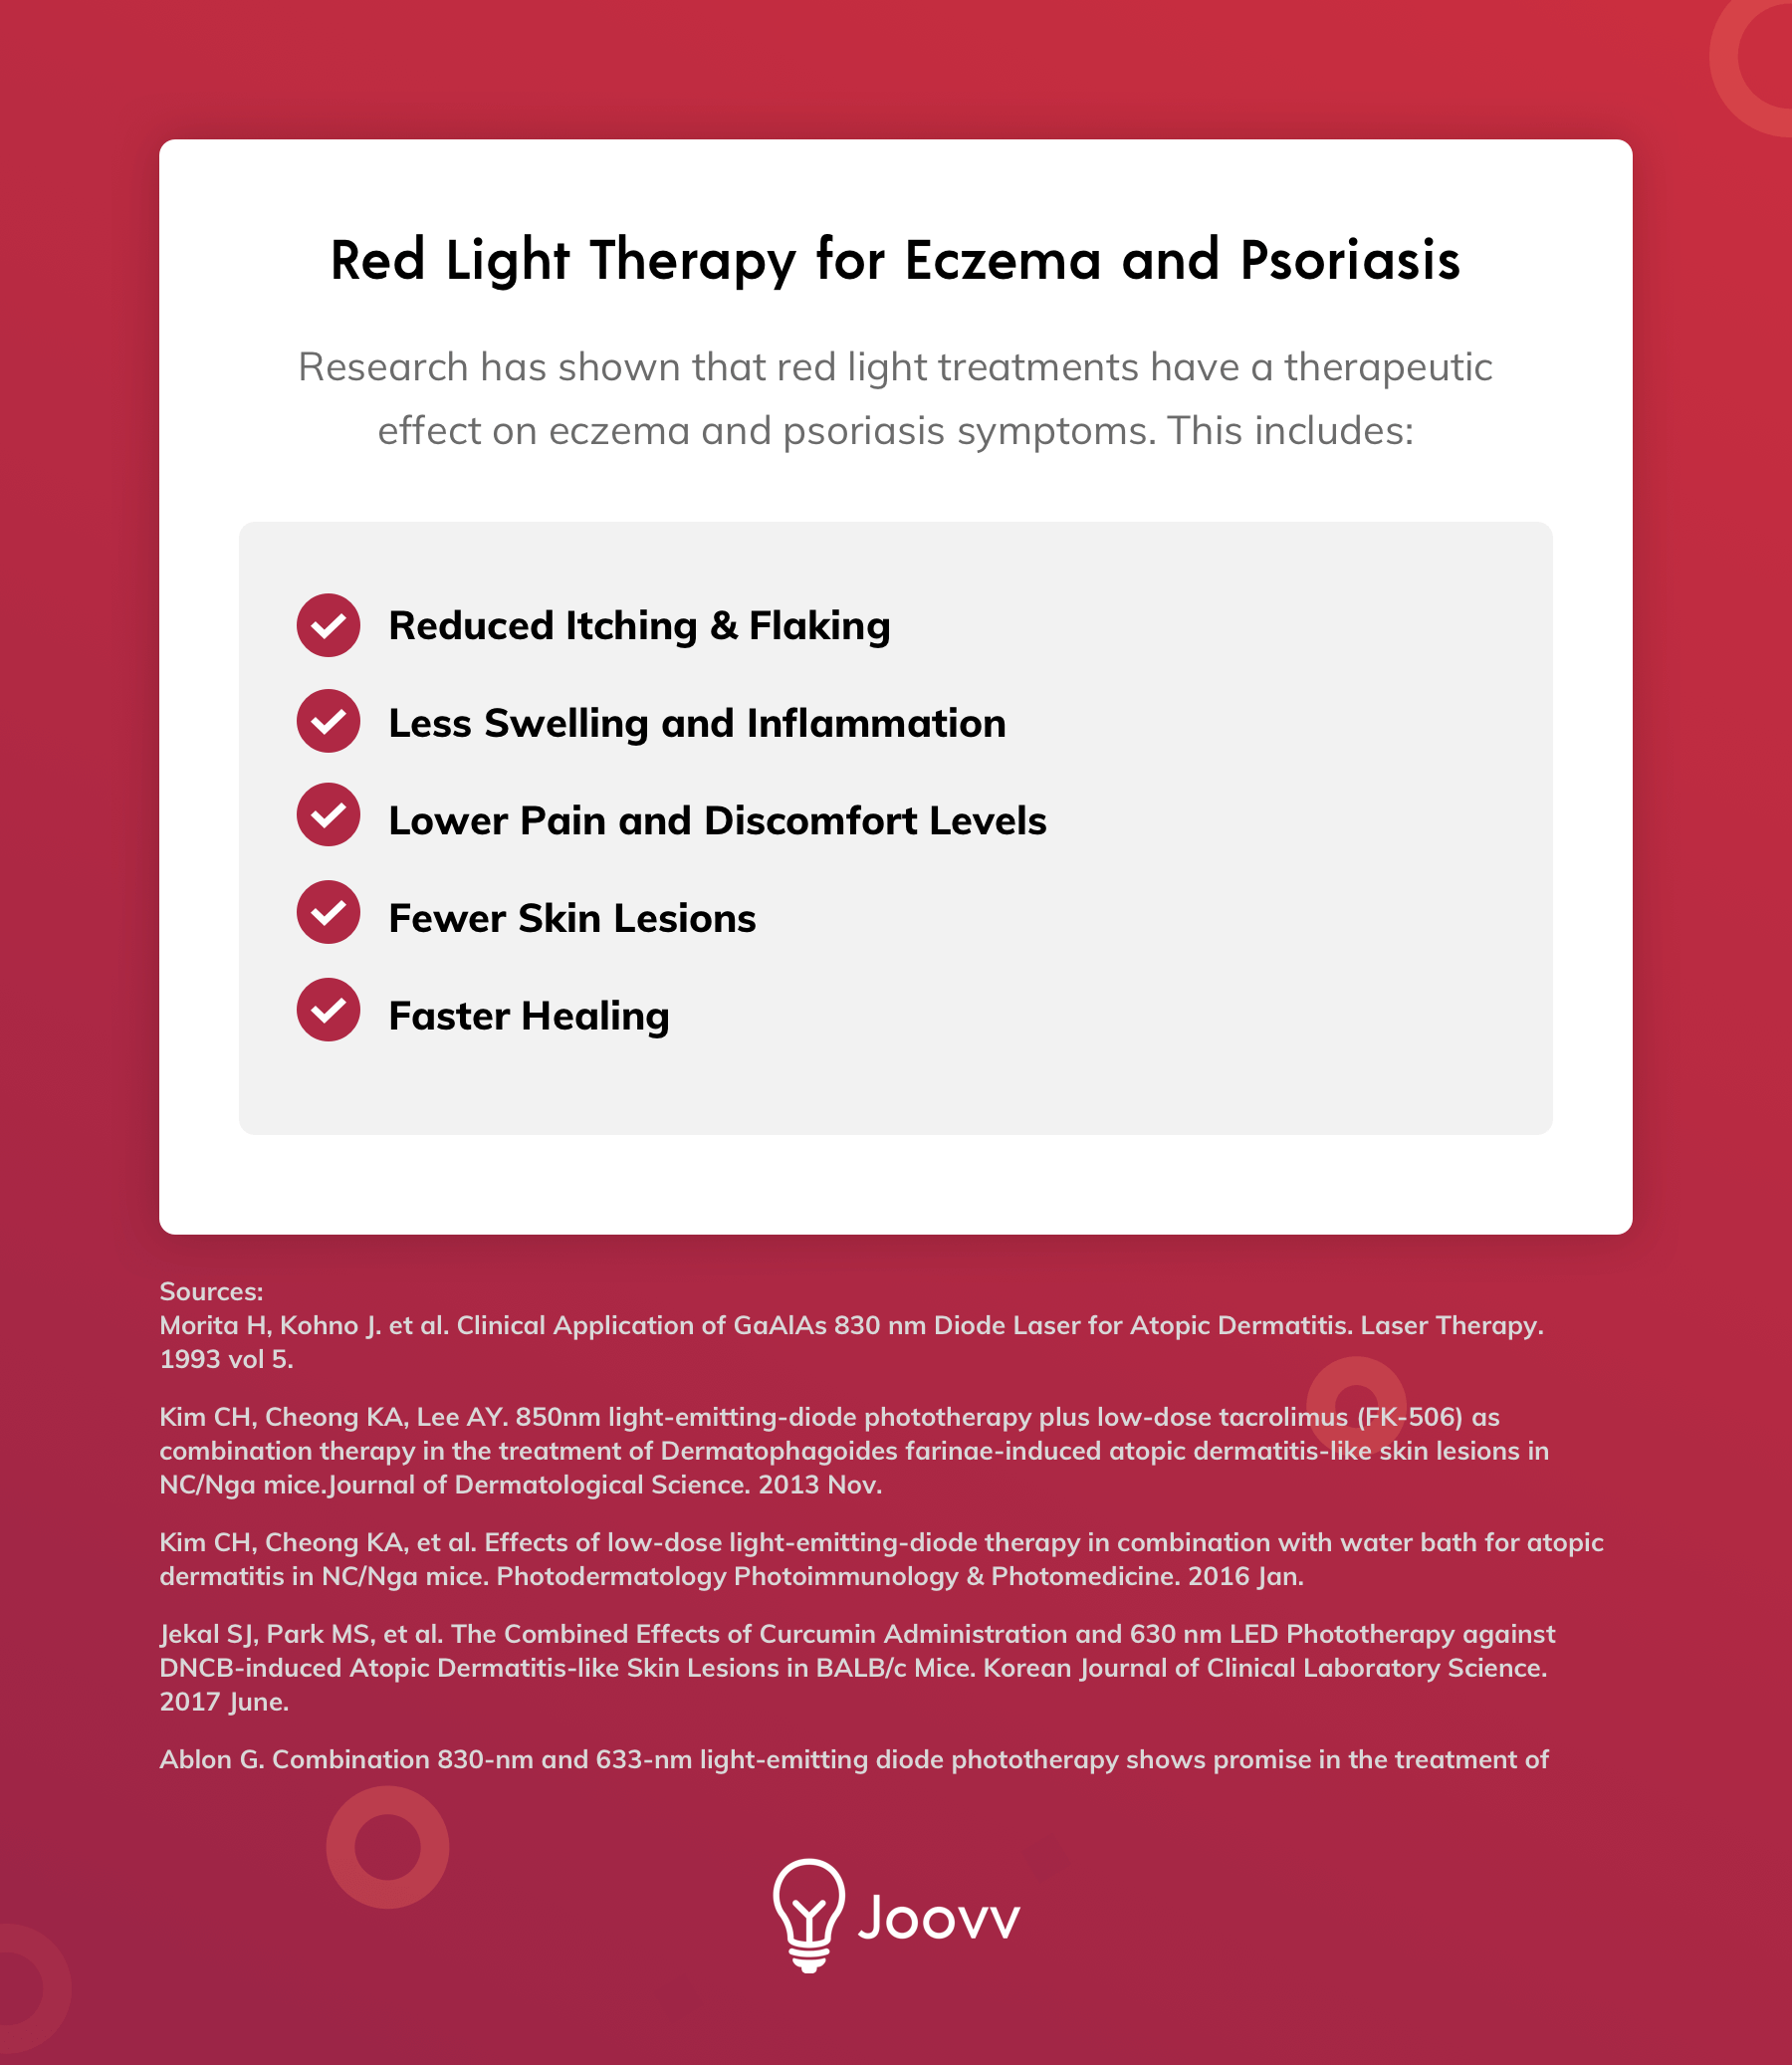 Red Light Therapy For Treating Eczema